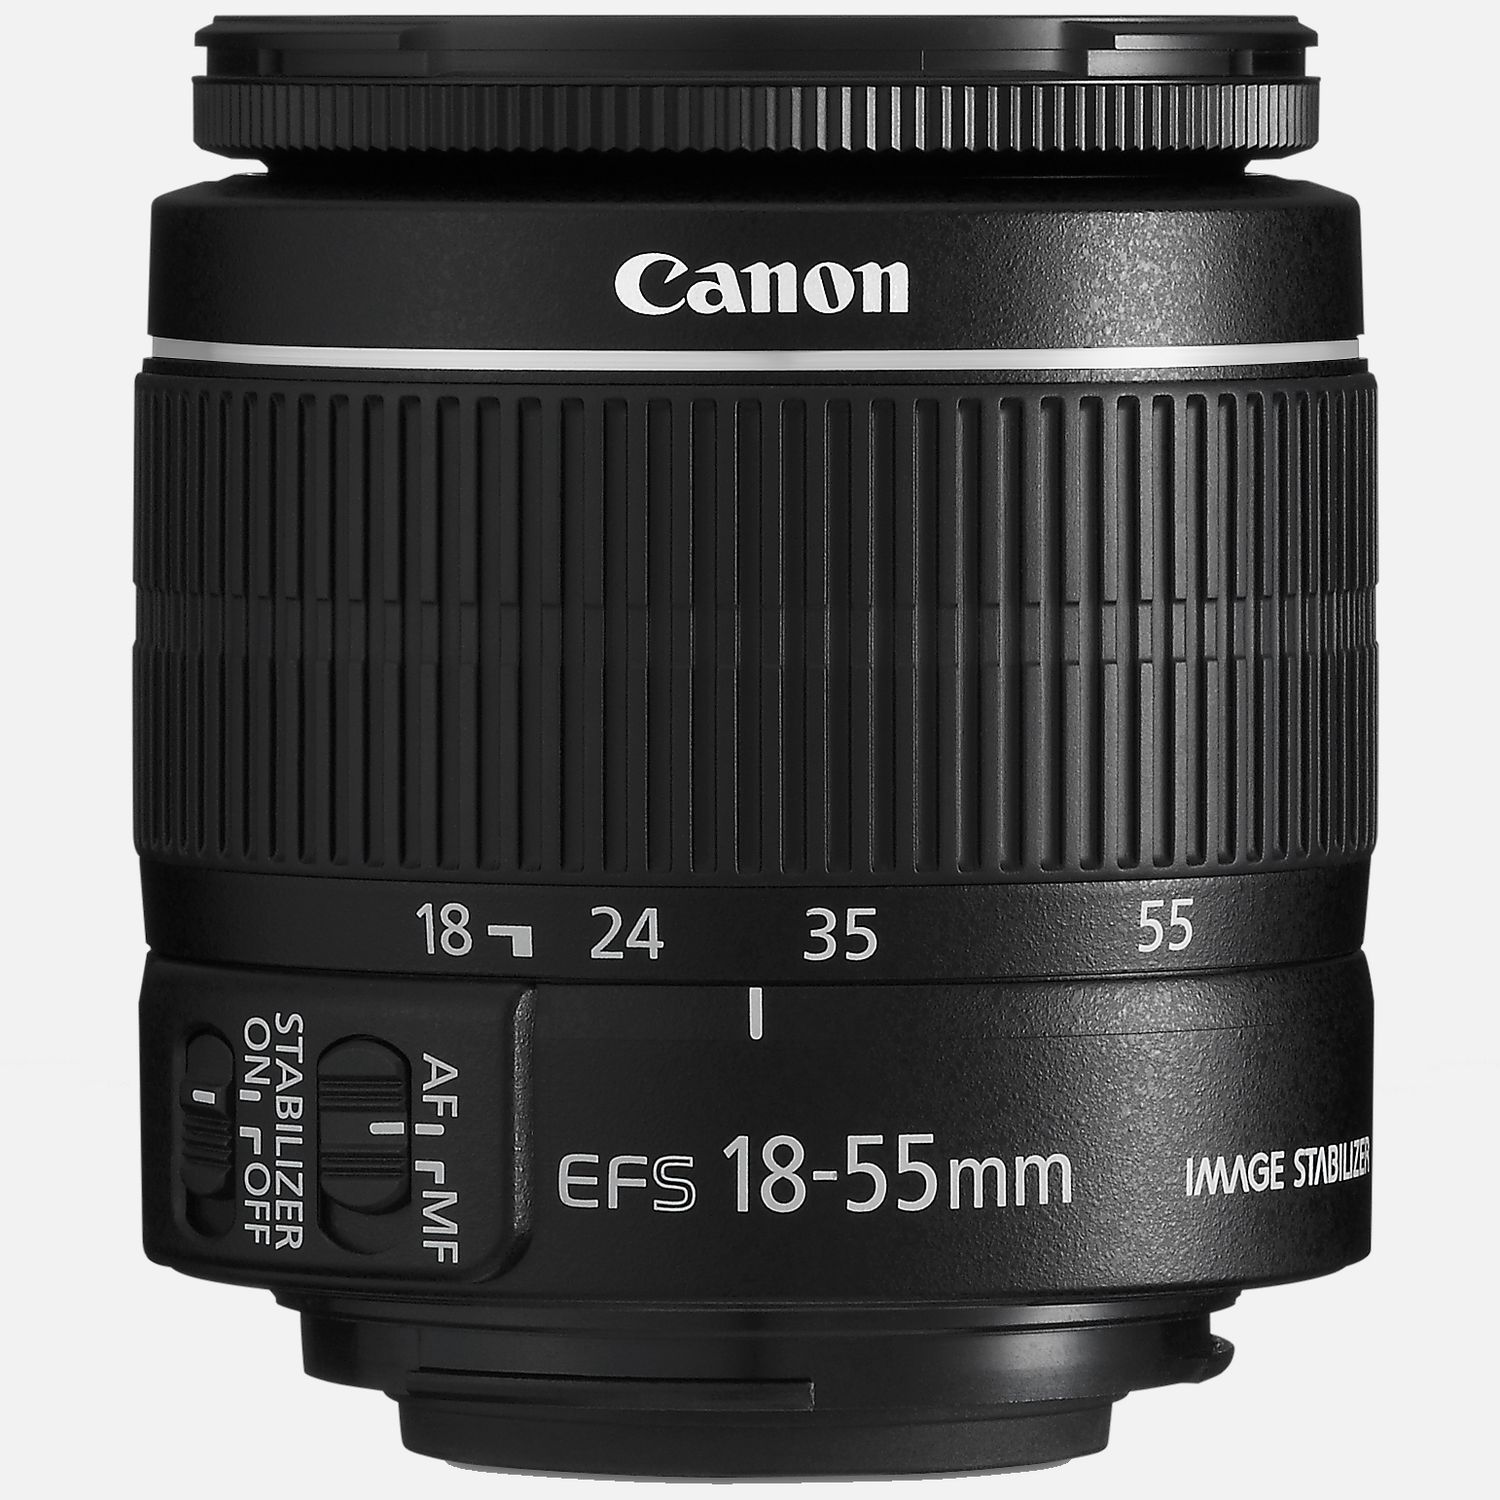 Buy Canon EF-S 18-55mm f/3.5-5.6 IS II Lens — Canon UK Store